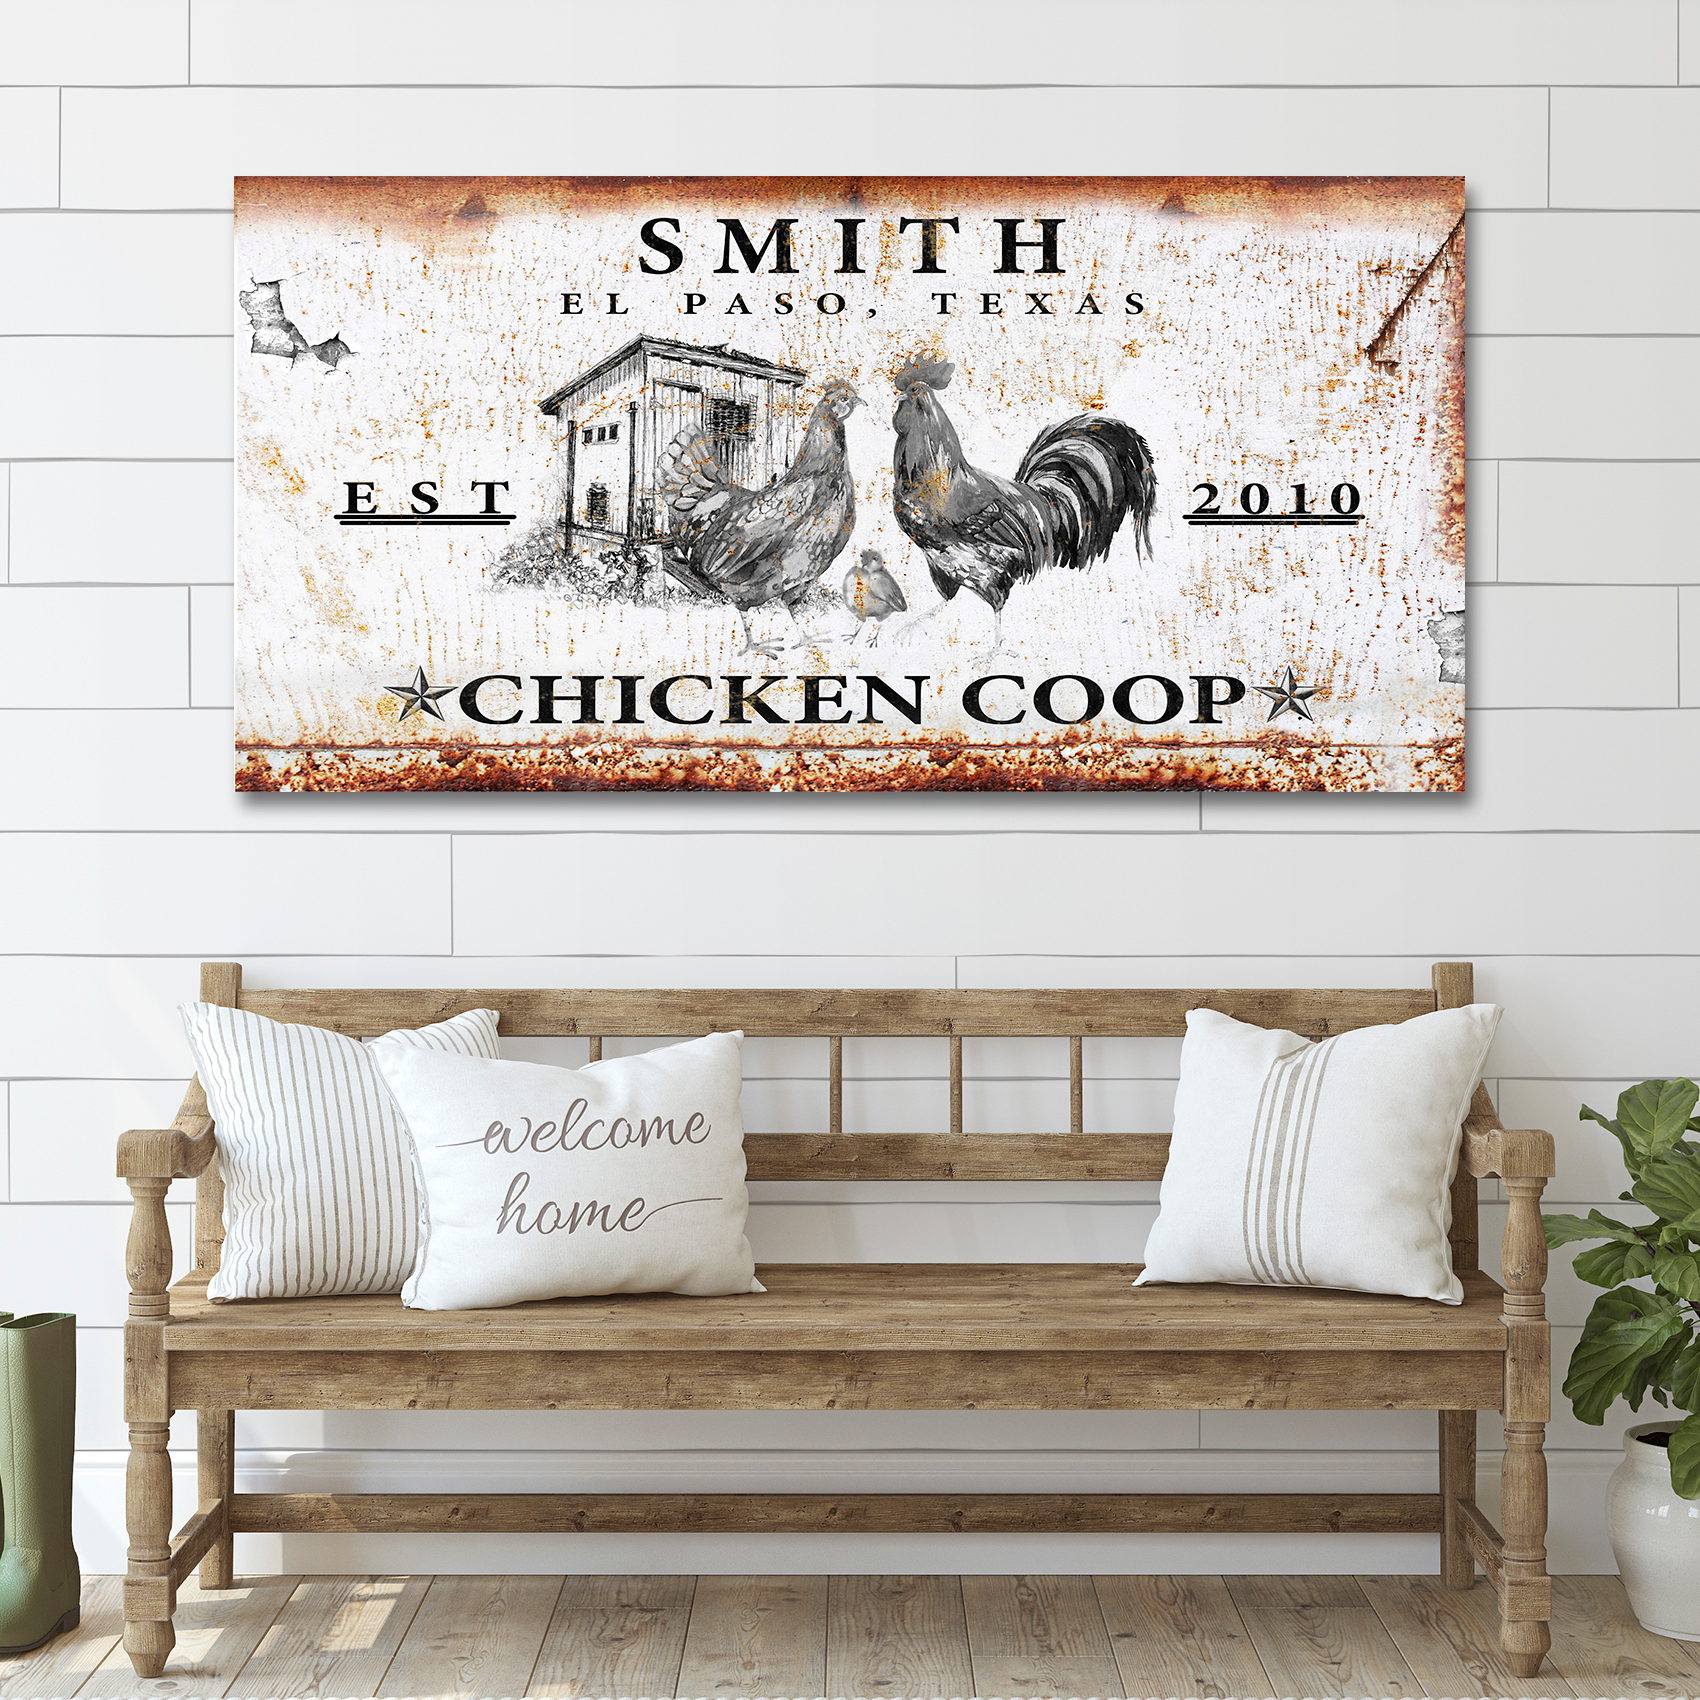 Chicken Coop Sign - Image by Tailored Canvases